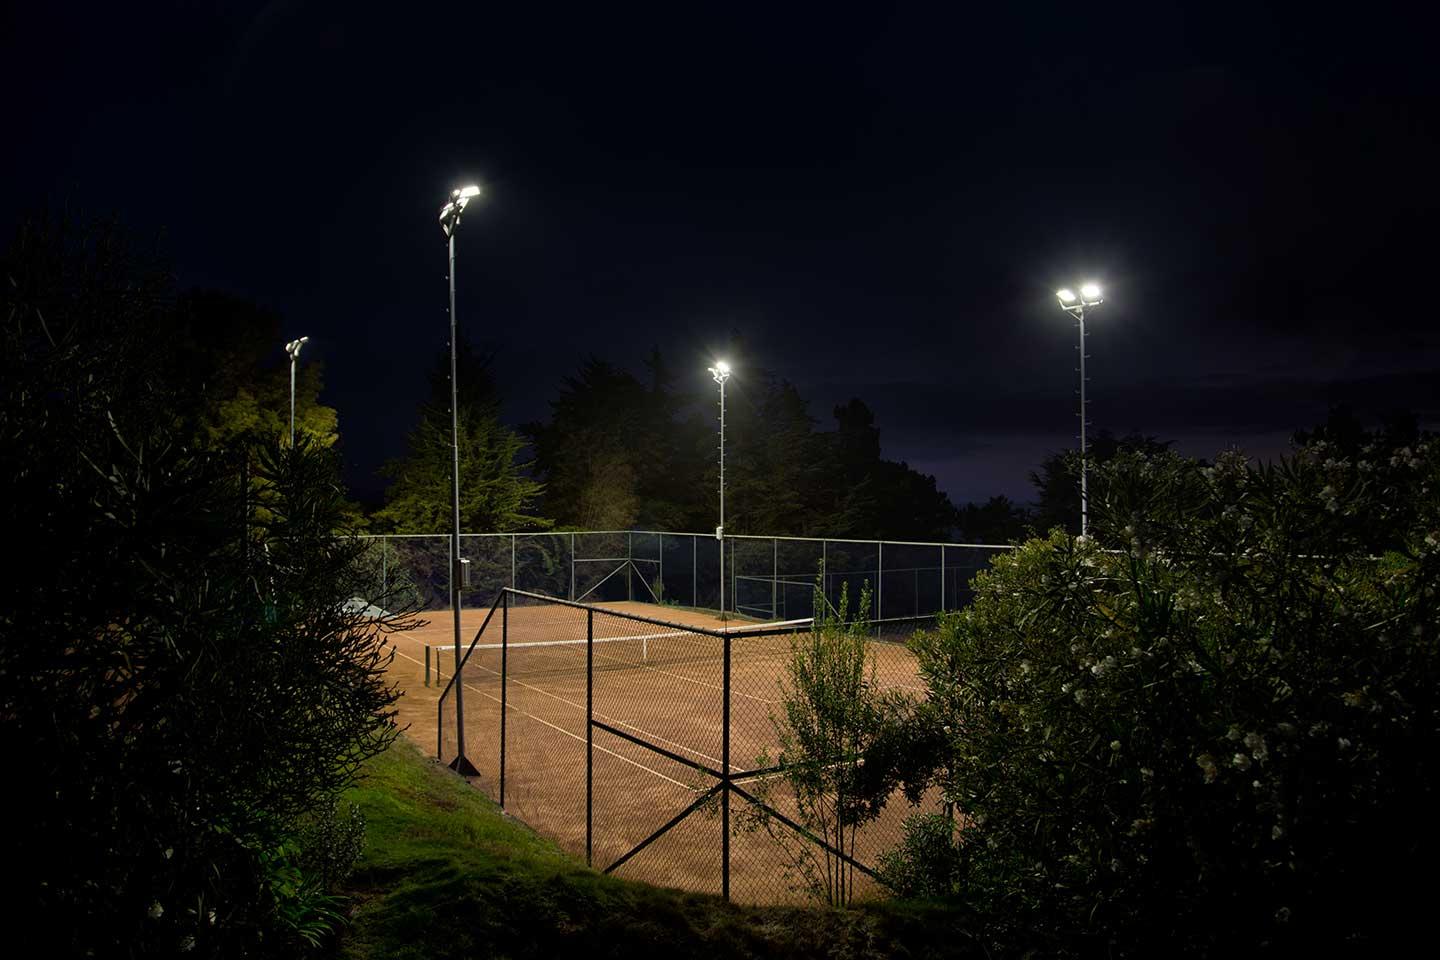 Schréder sports lighting solution provides perfect visibility on the tennis courts at Cantagua club house with zero light spill for residents